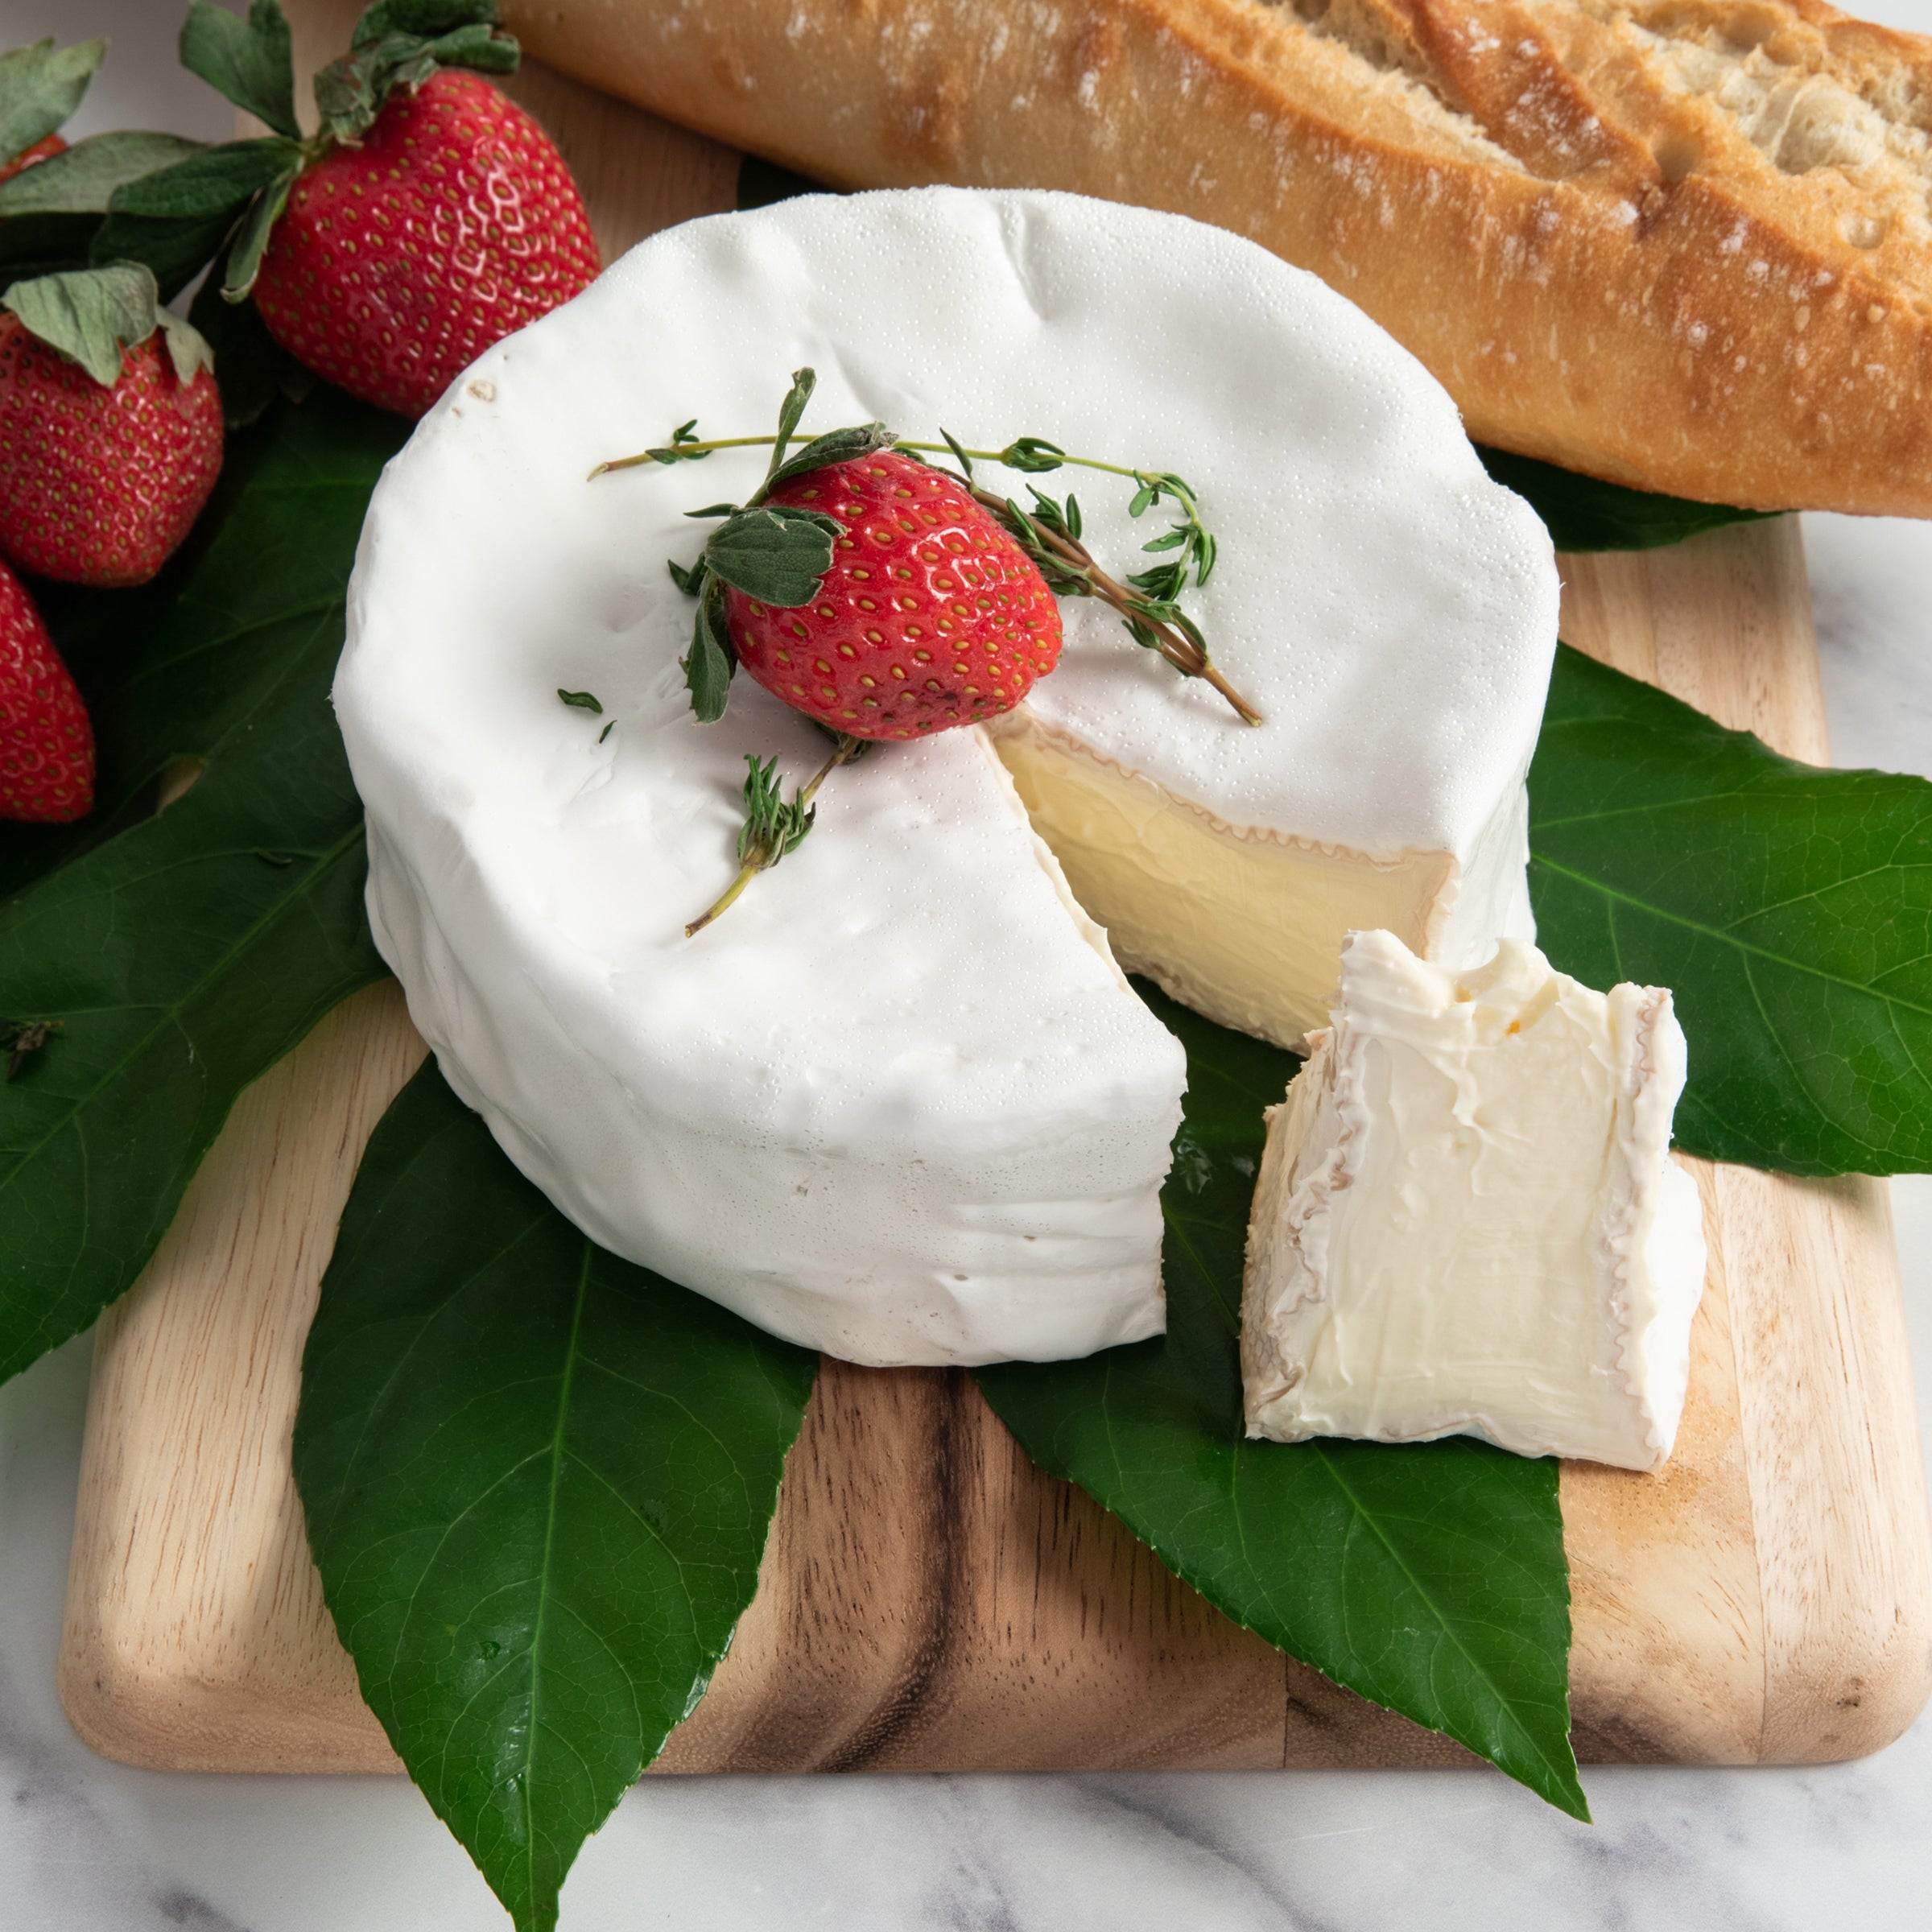 Brillat Savarin Affine Cheese_Fromagerie Delin_Cheese